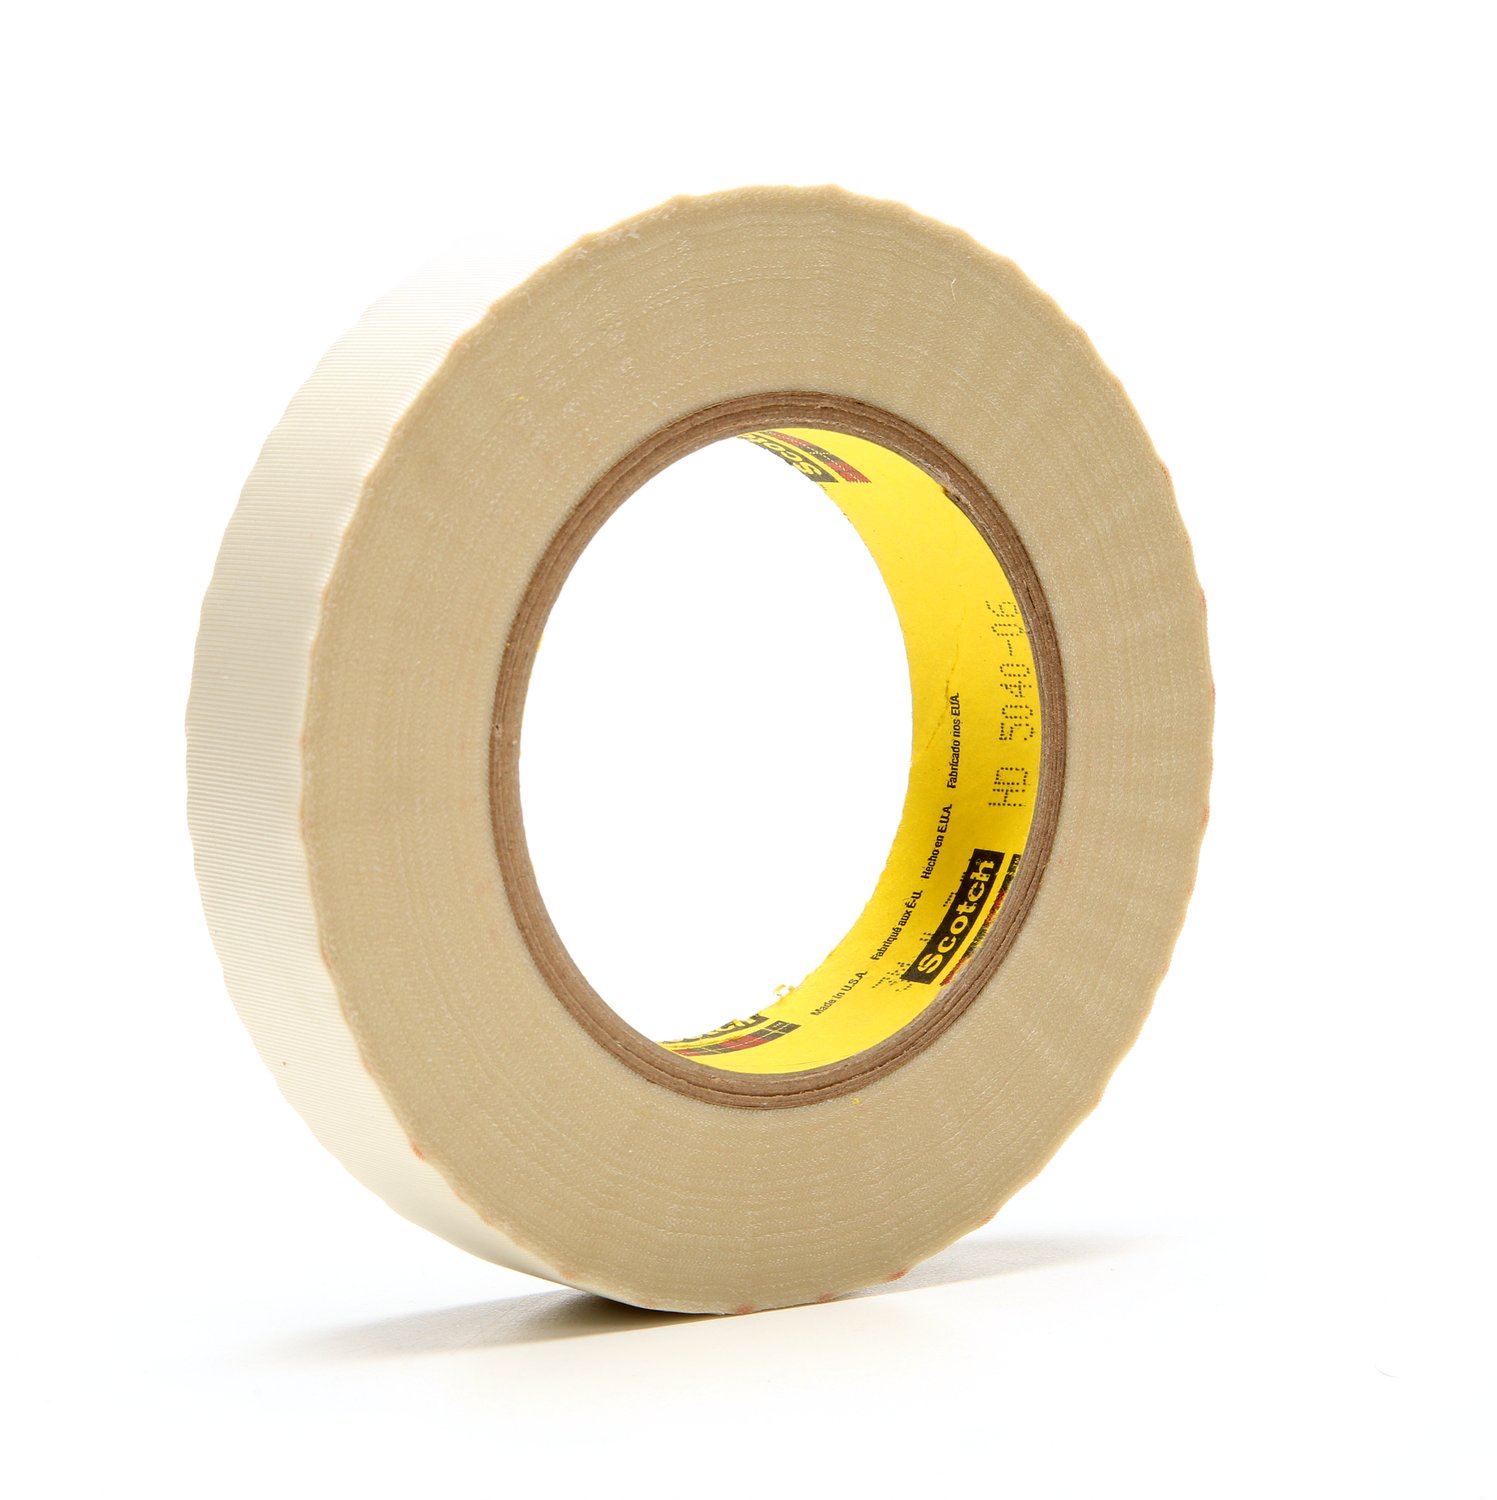 7000050071 - 3M Glass Cloth Tape 361, White, 1 in x 60 yd, 6.4 mil, 9 rolls per
case, Individually Wrapped Conveniently Packaged